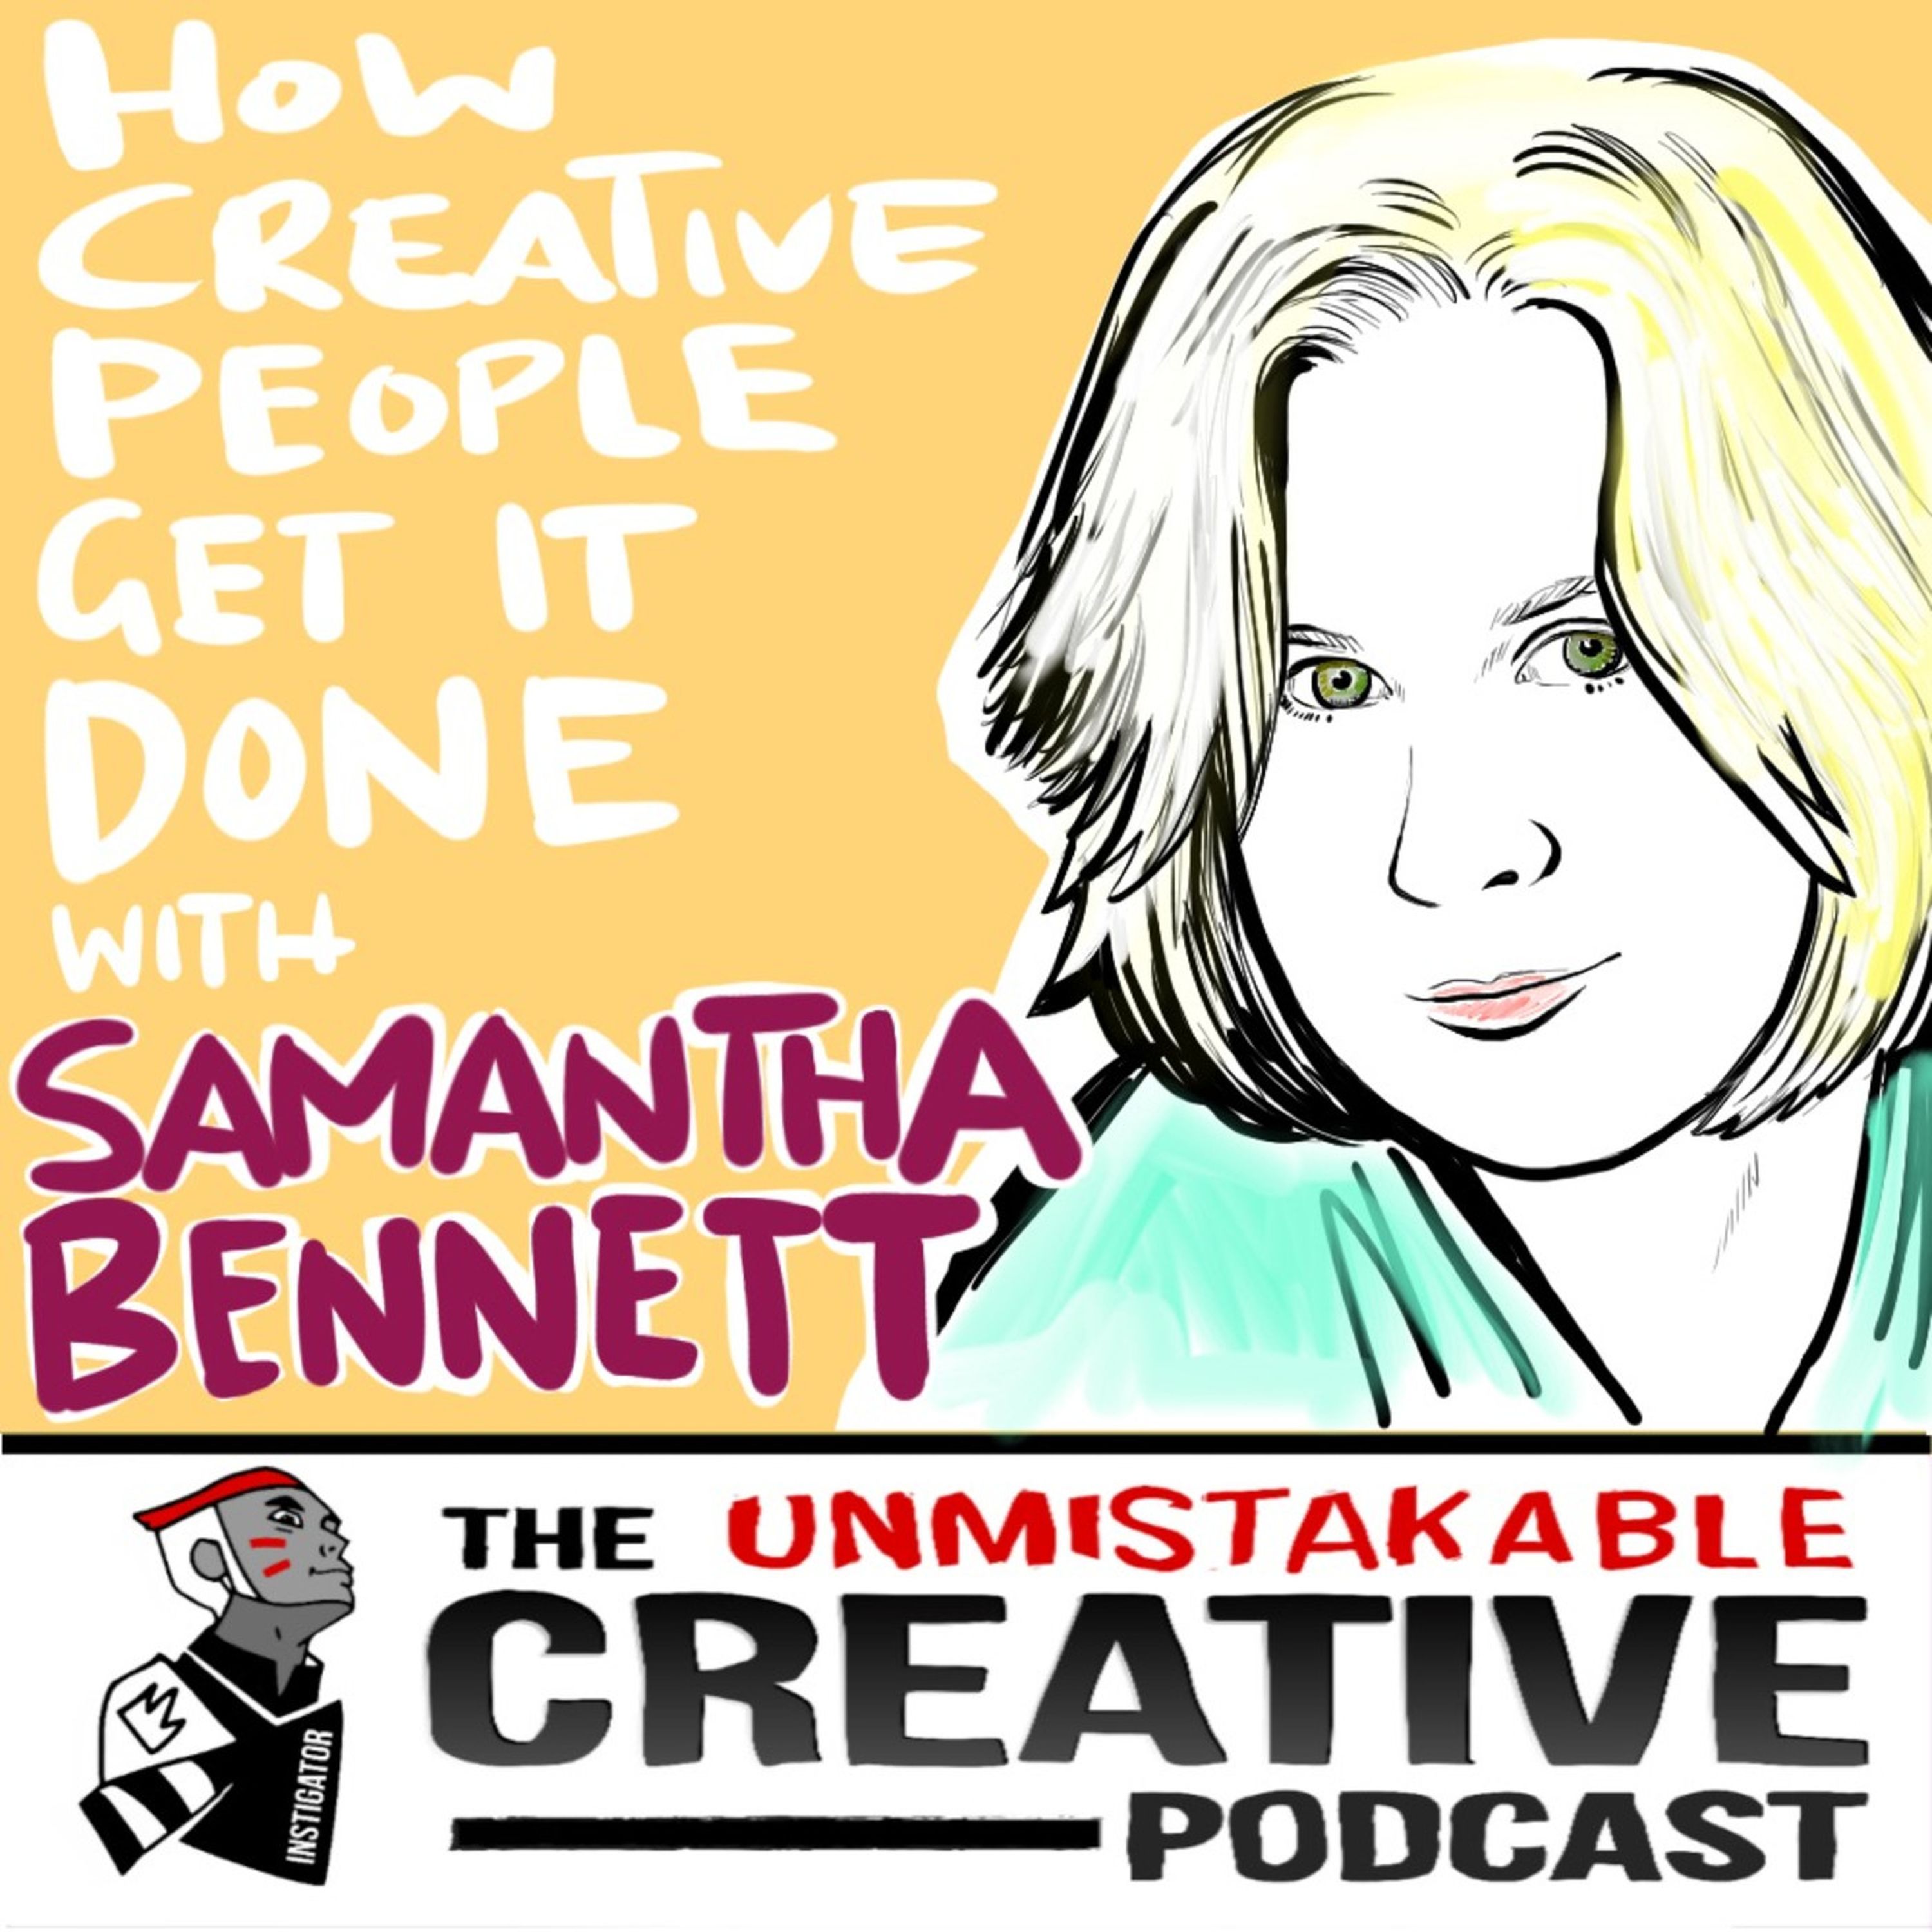 How Creative People Get it Done with Samantha Bennett